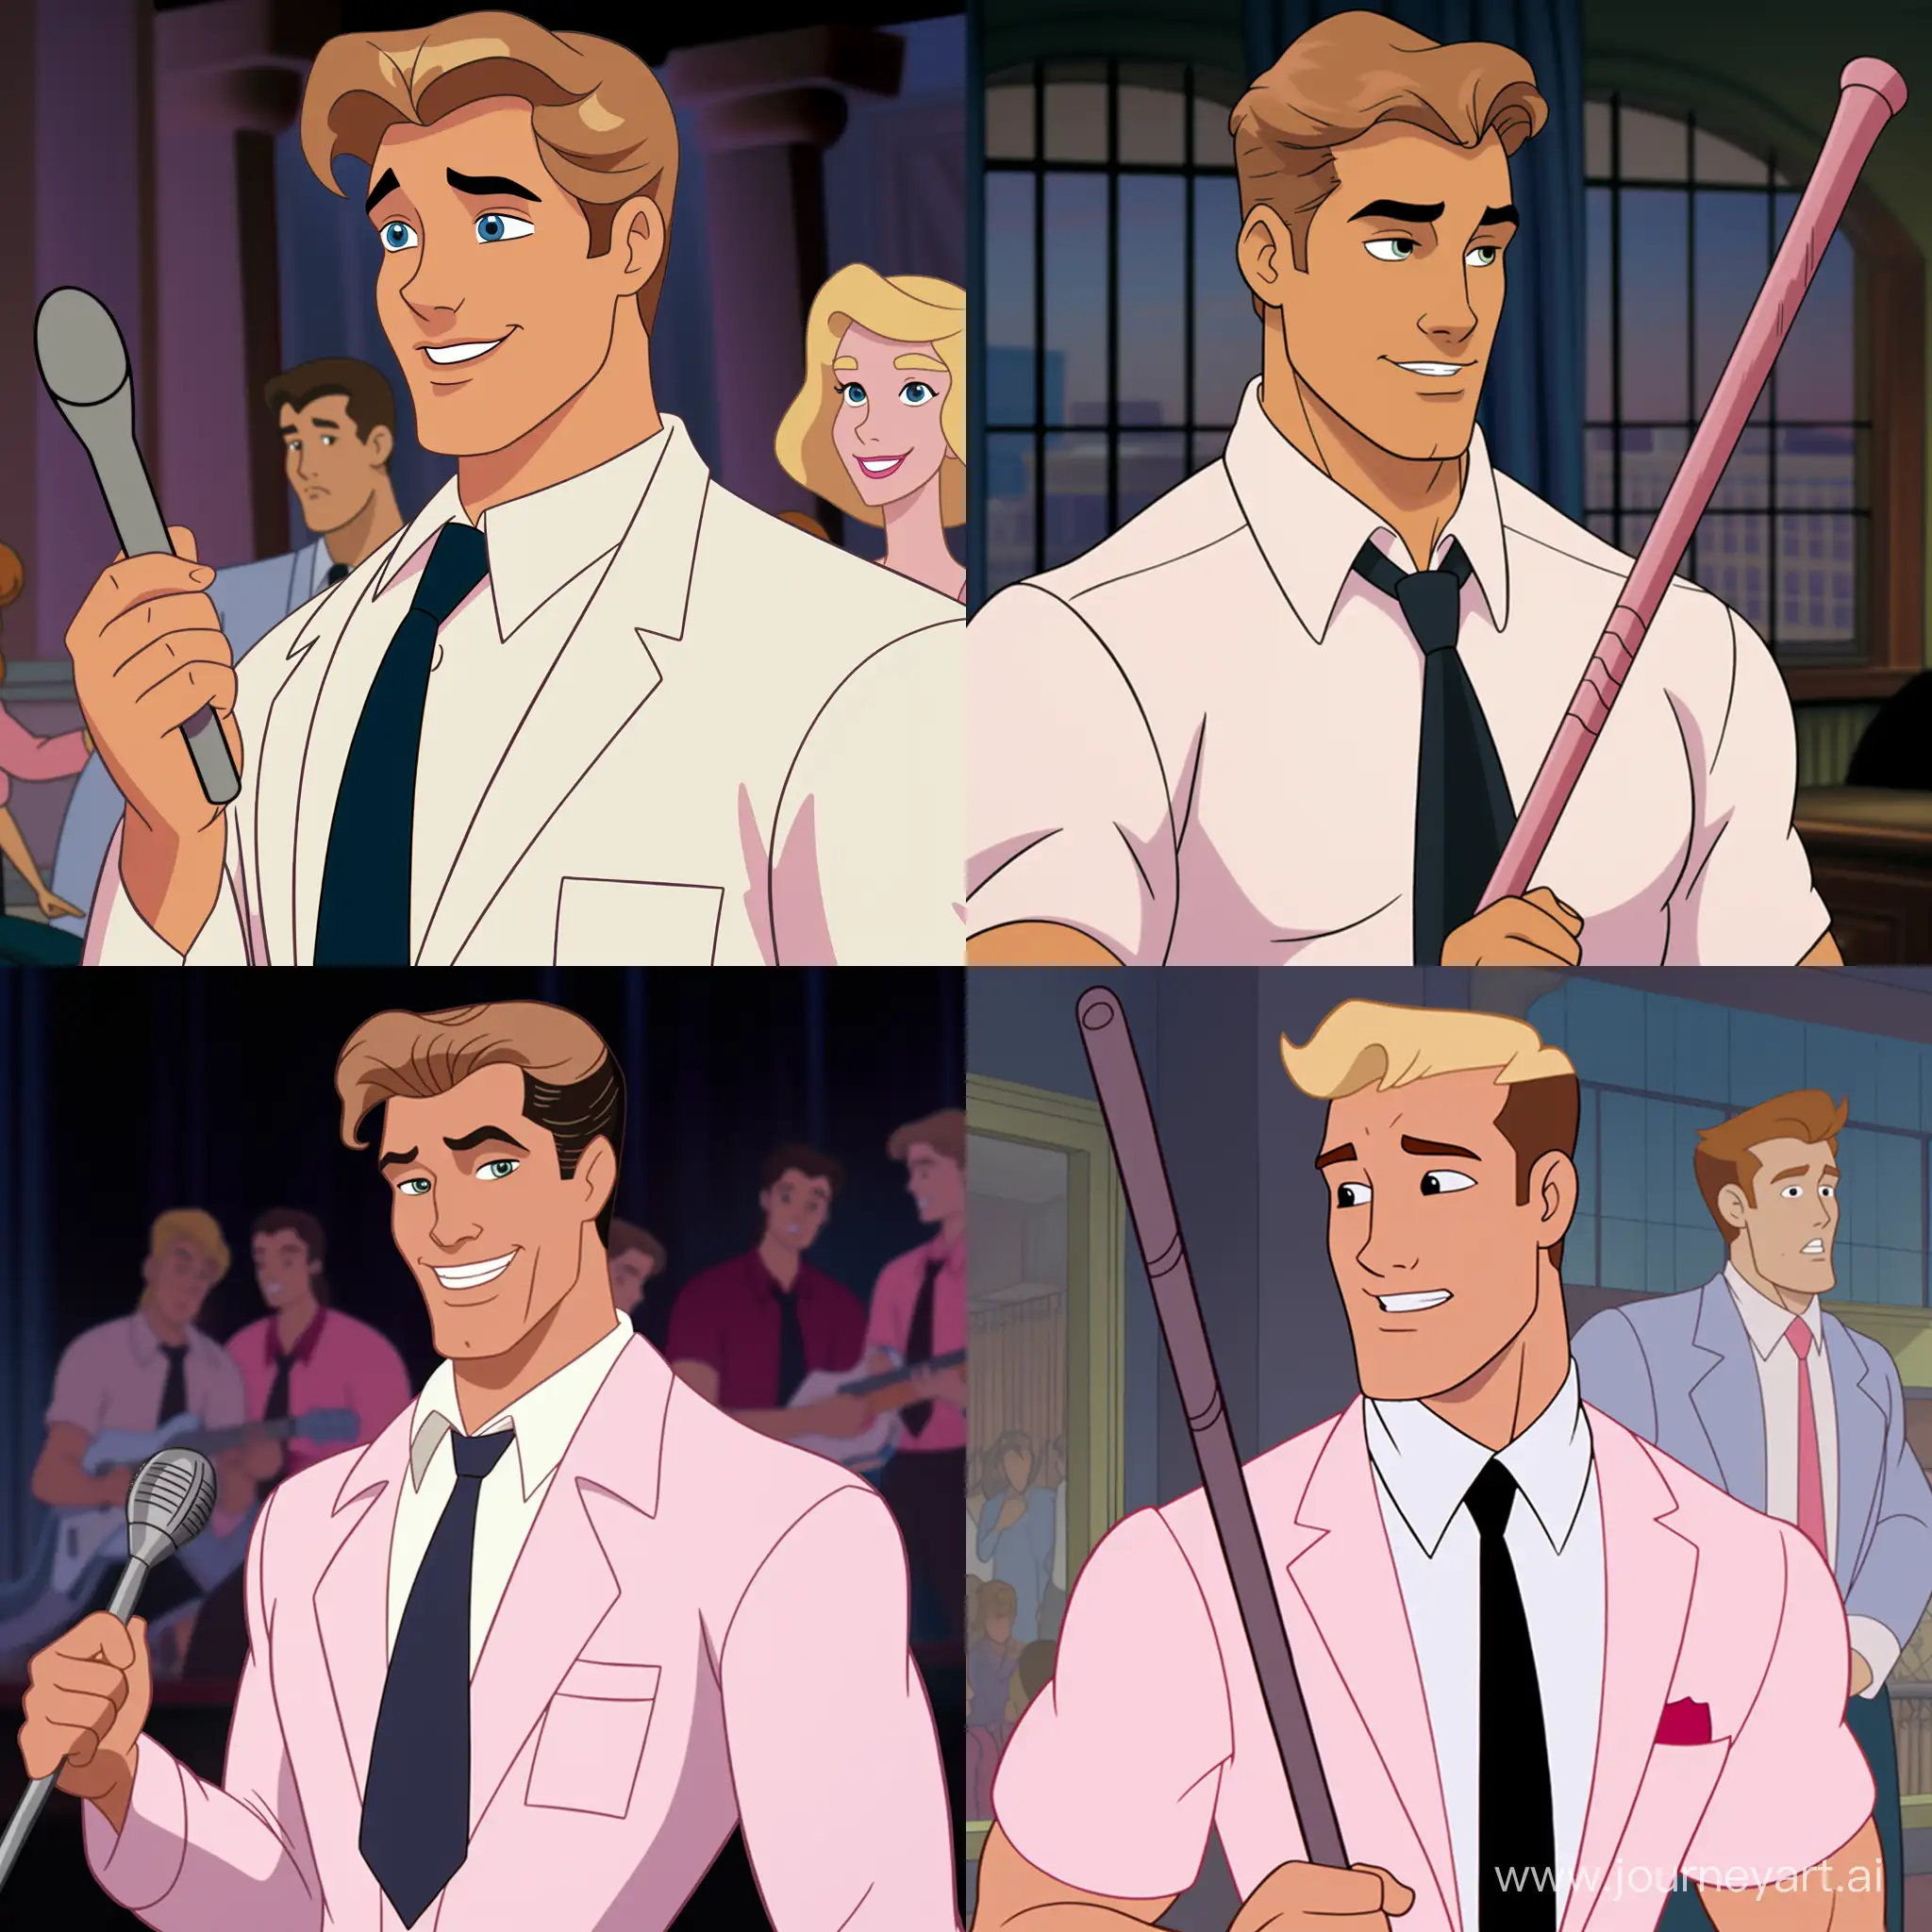 "90s Disney animated movie screencap" of a "stylized cartoon of a handsome, young, muscular but trim man, in his twenties "with slightly roughed-up fluffy blonde short fun 50s era hairstyle", "swinging a baseball bat", "wearing a "basic, solid white, tight-fitting dress shirt", a "pink tie", and black trousers" "very important to show him with the baseball bat"